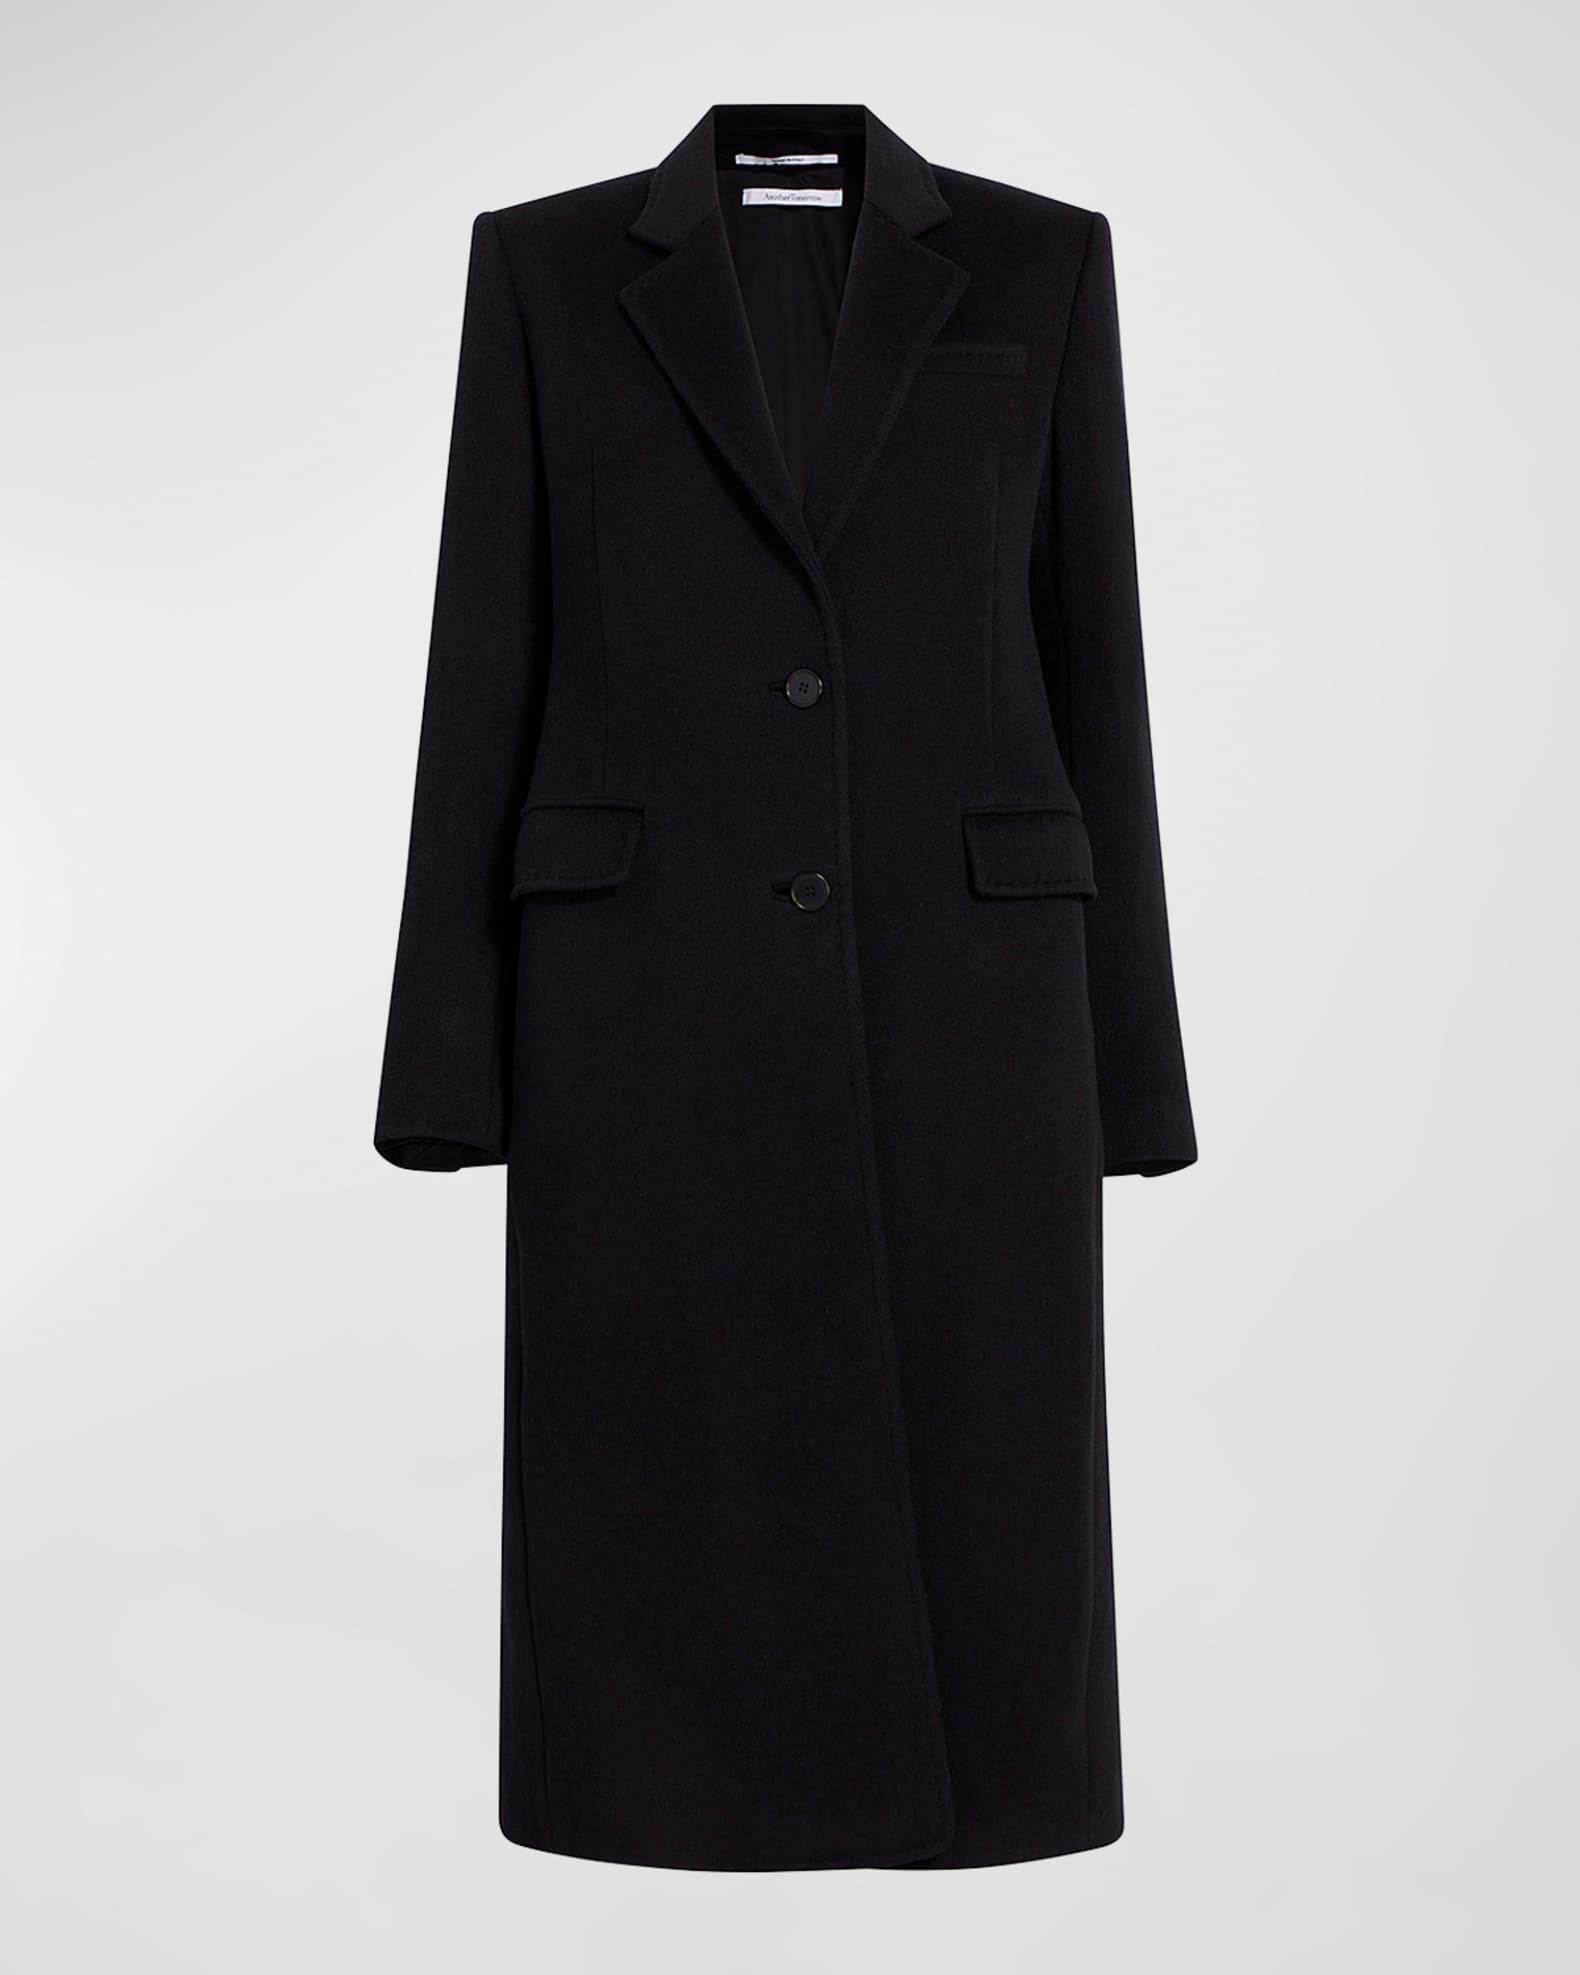 Another Tomorrow Cashmere Blend Tailored Peacoat | Neiman Marcus